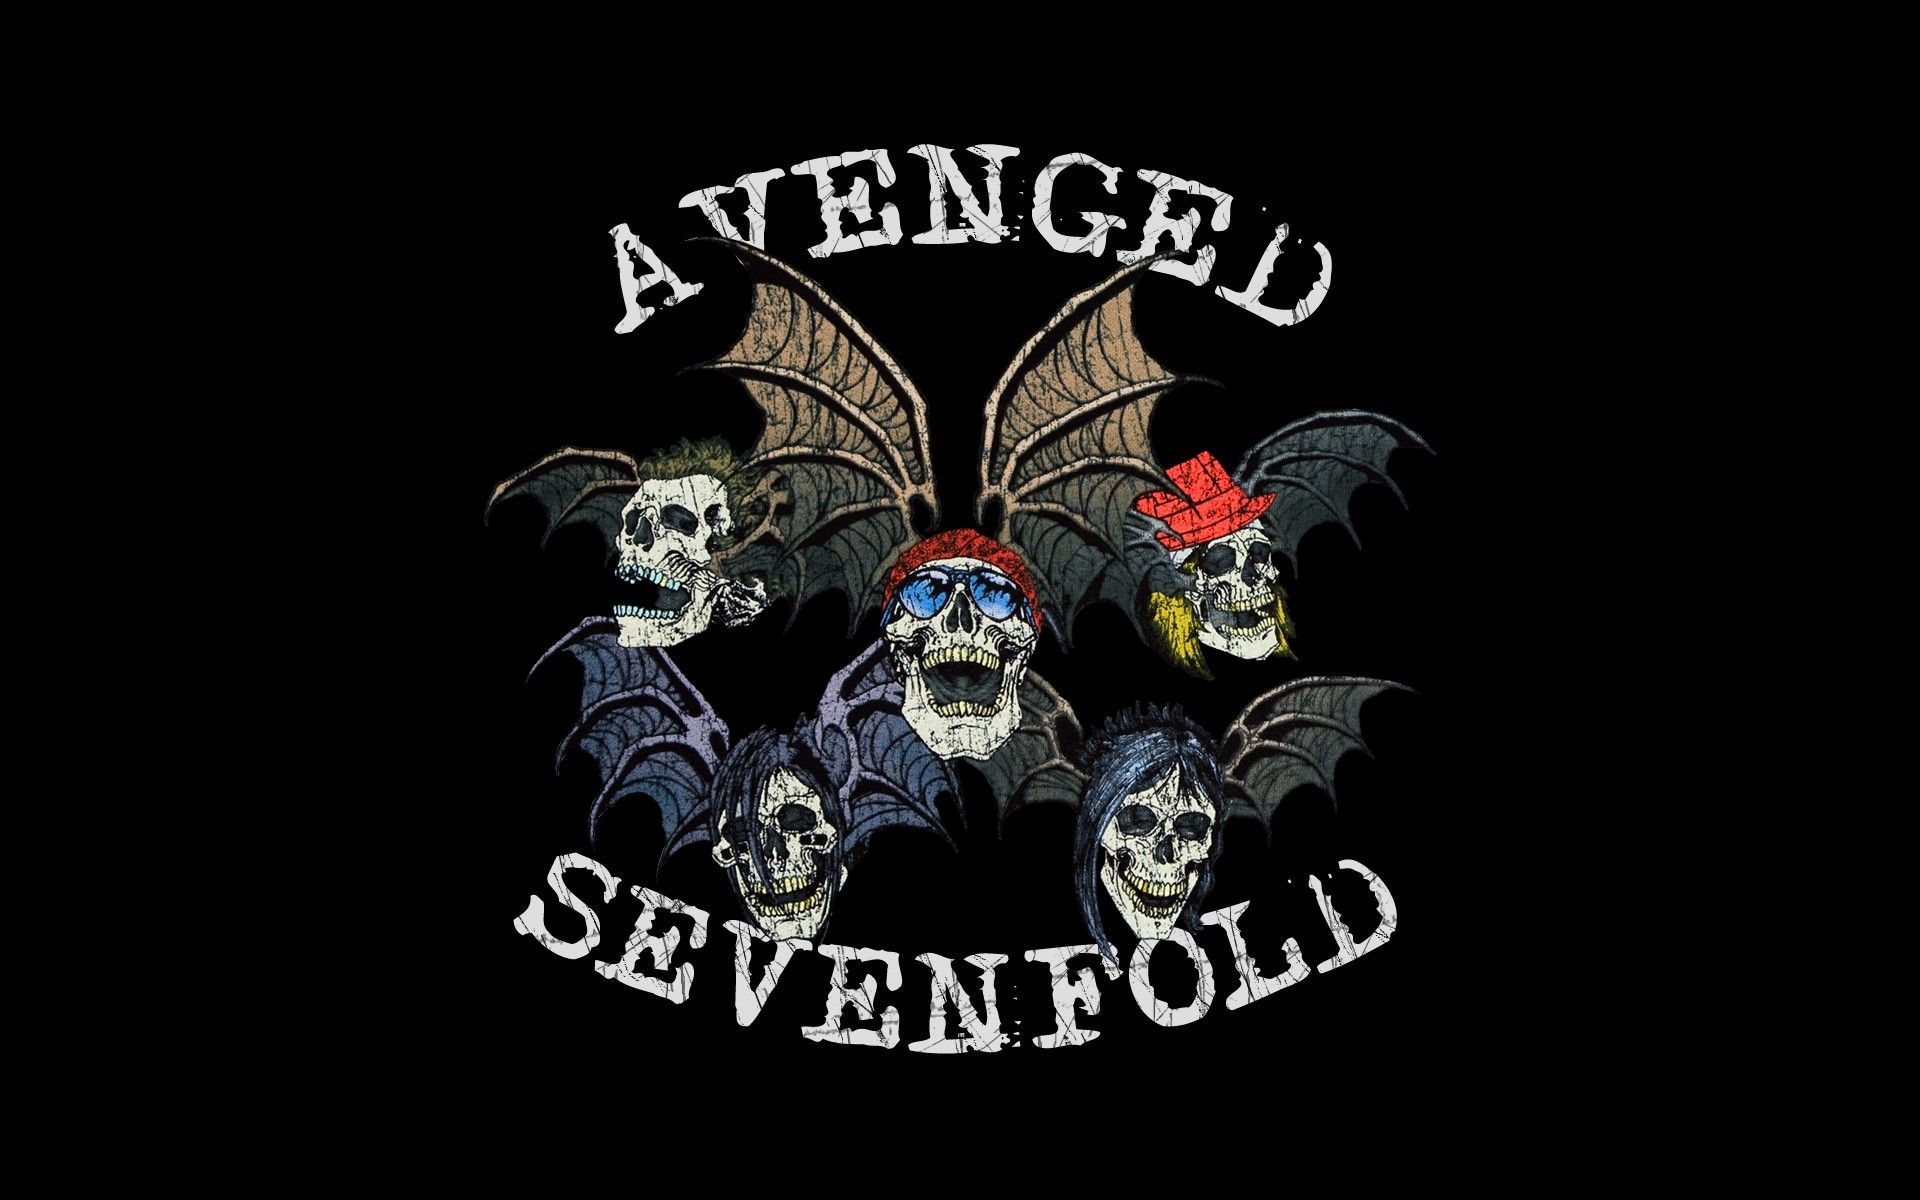 Sevenfold 4K wallpaper for your desktop or mobile screen free and easy to download